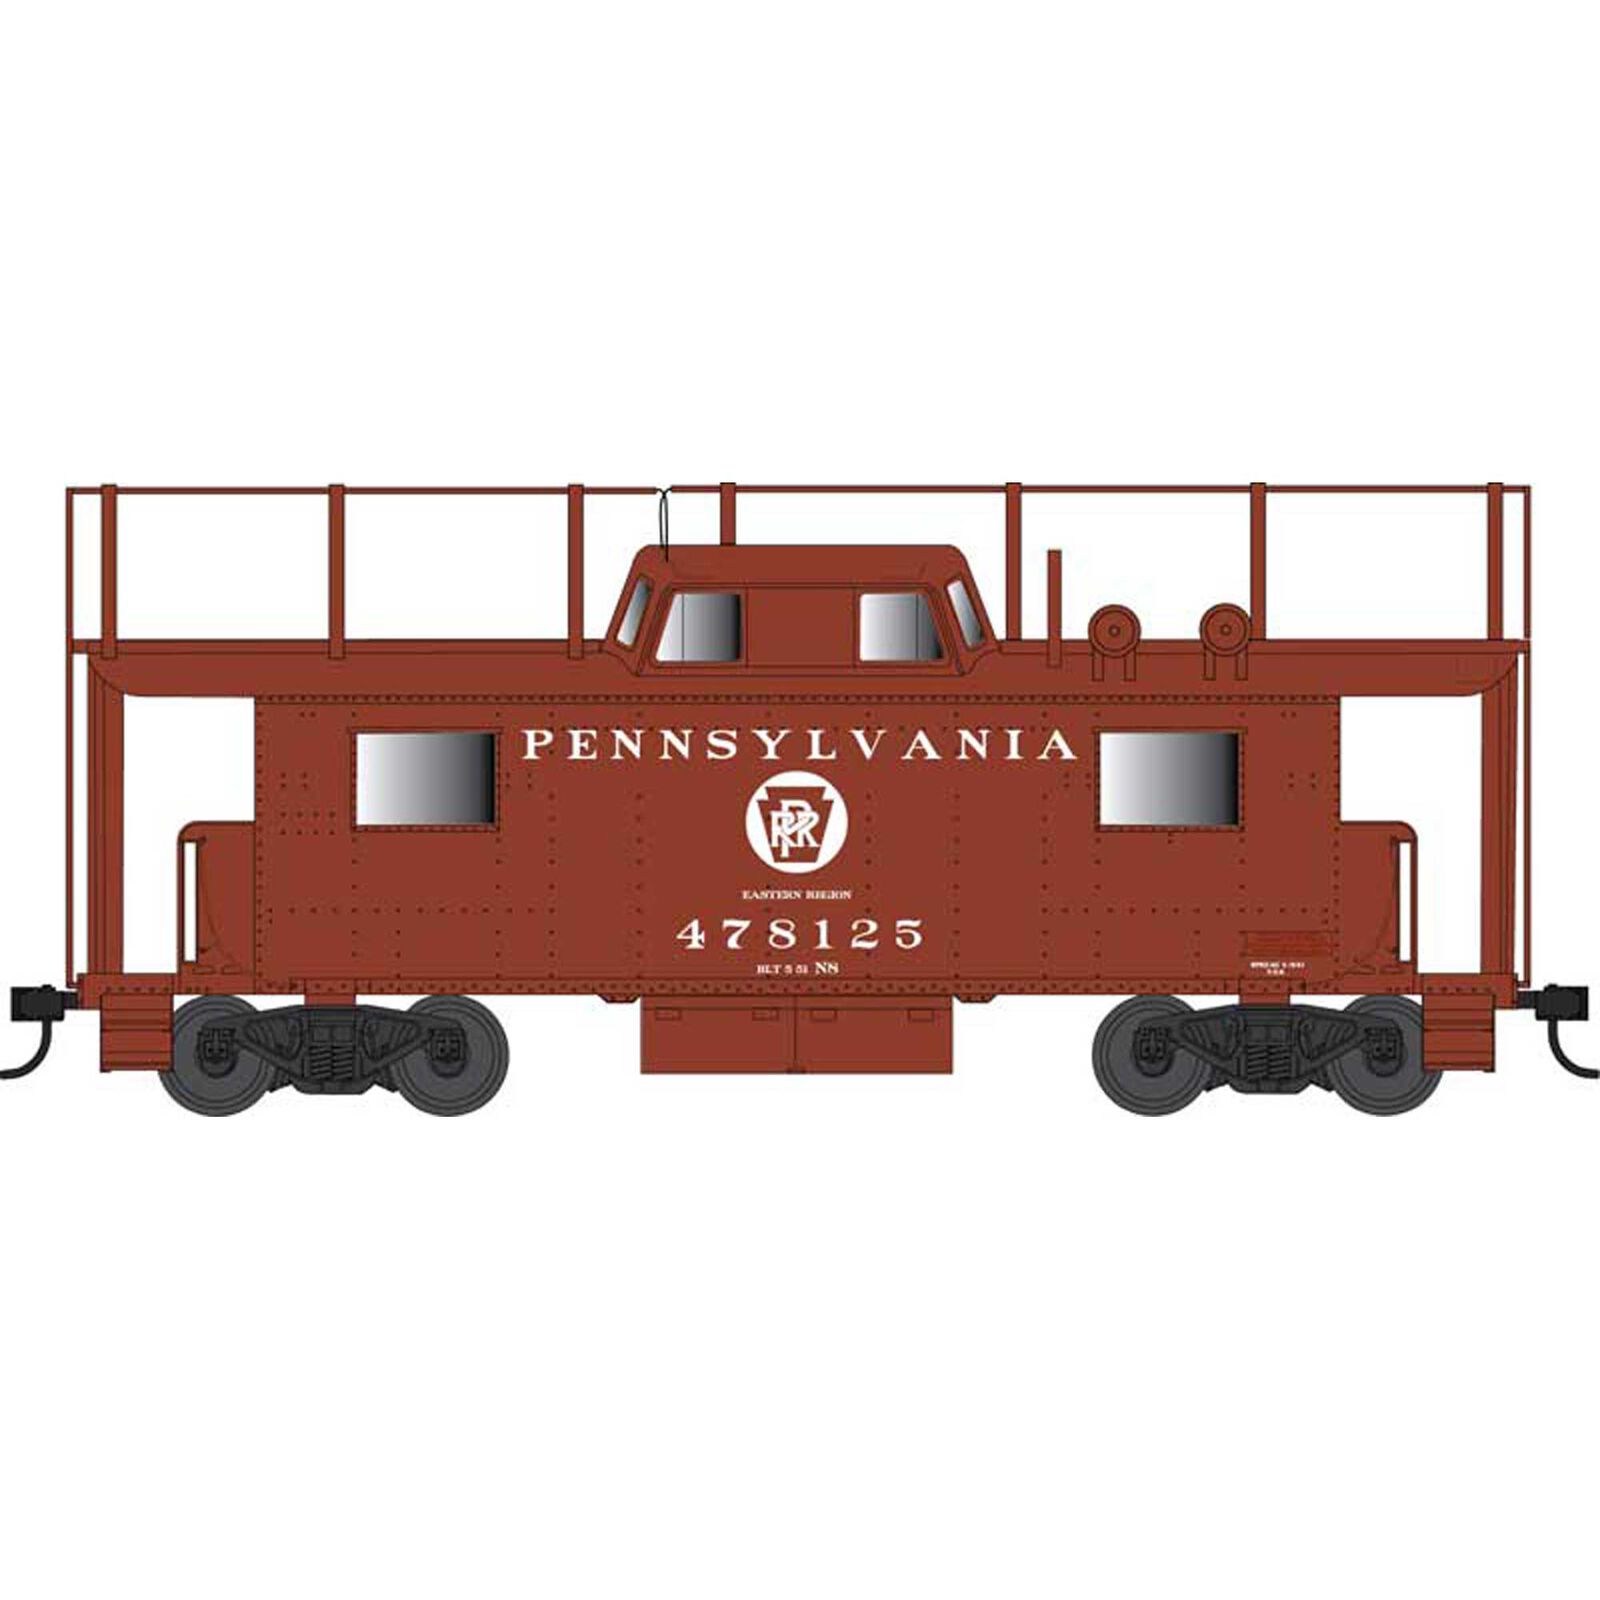 HO N8 Caboose PRR/CK Eastern Reg with Antenna #478125